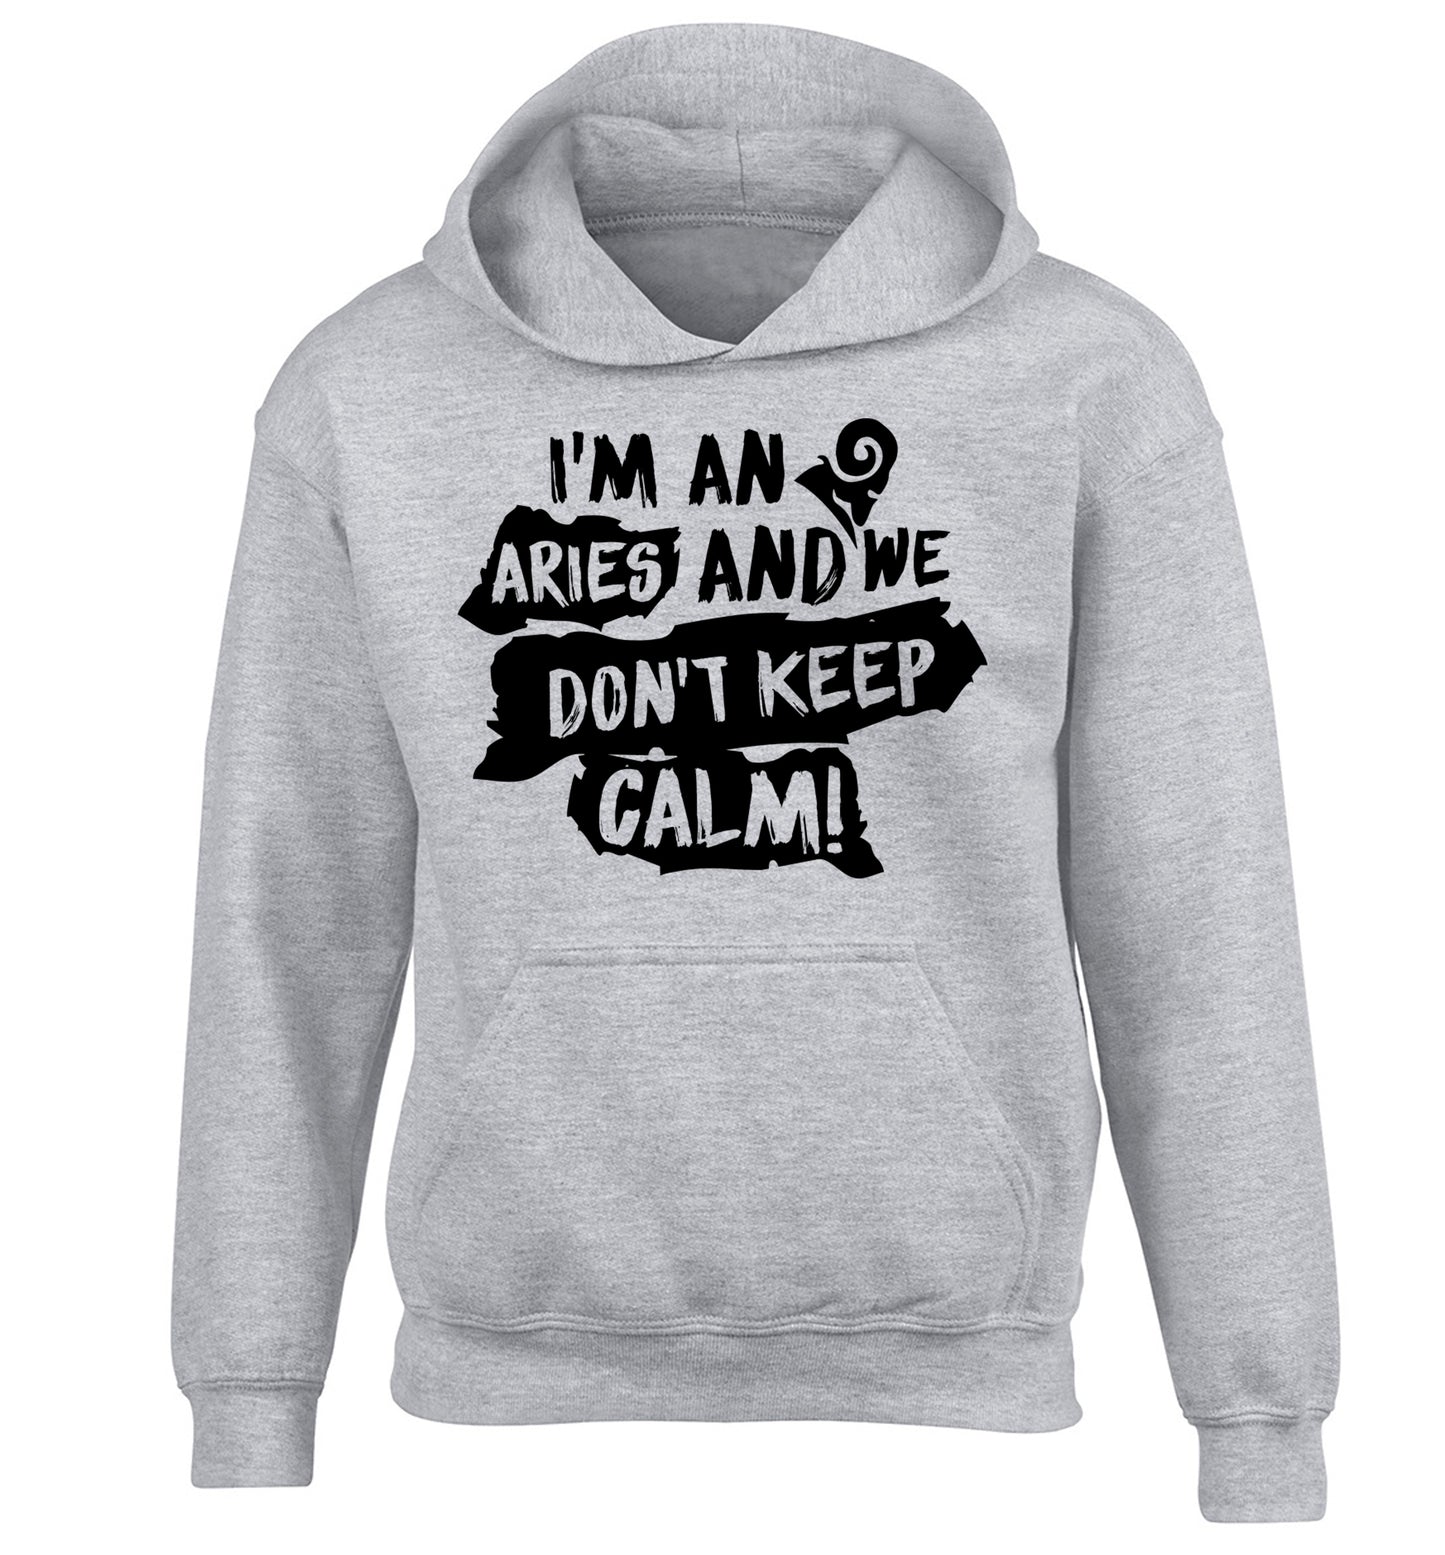 I'm an aries and we don't keep calm children's grey hoodie 12-13 Years